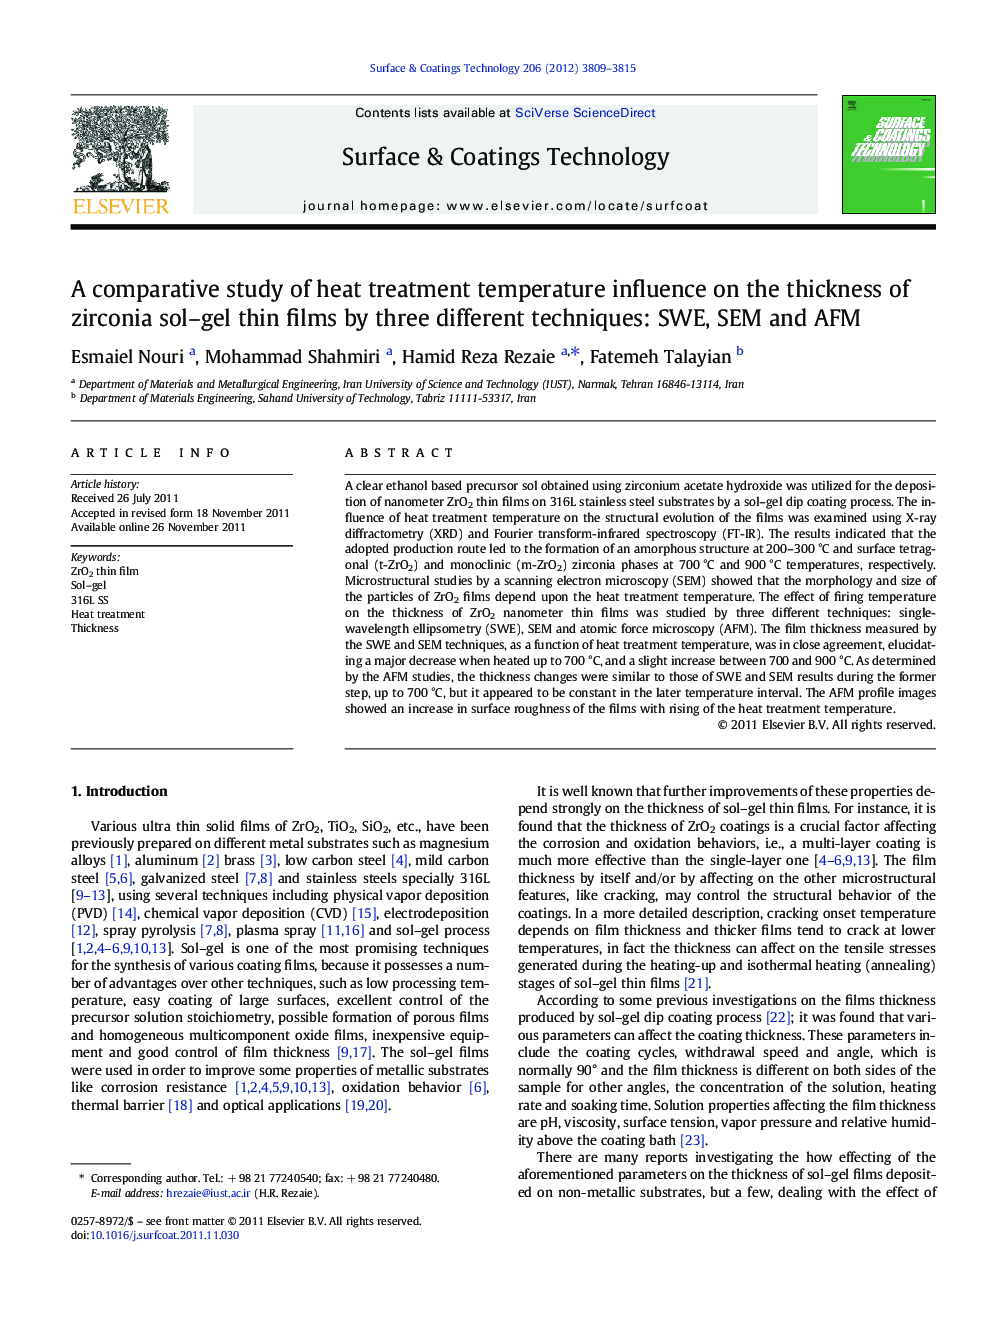 A comparative study of heat treatment temperature influence on the thickness of zirconia sol–gel thin films by three different techniques: SWE, SEM and AFM